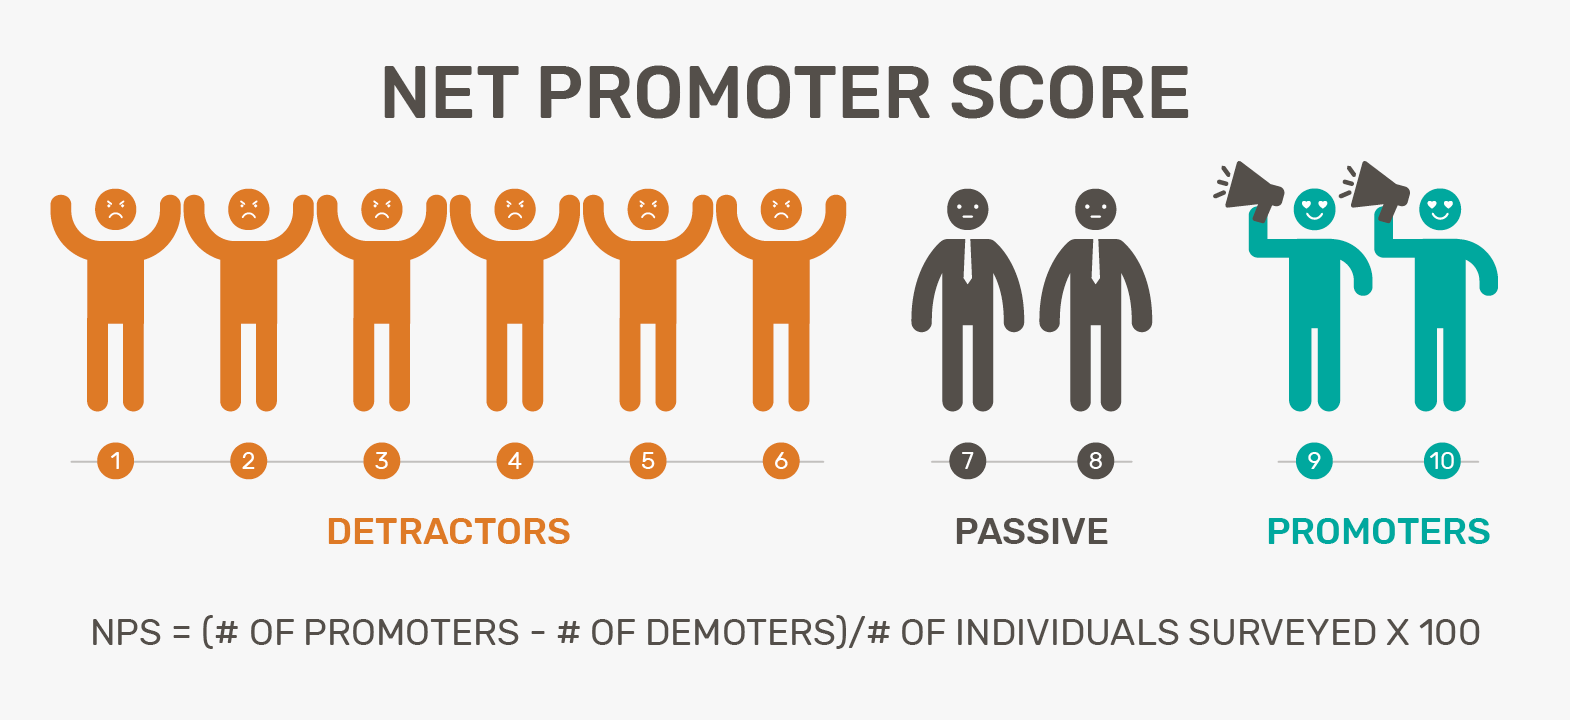 The image shows how to calculate net promoter score.